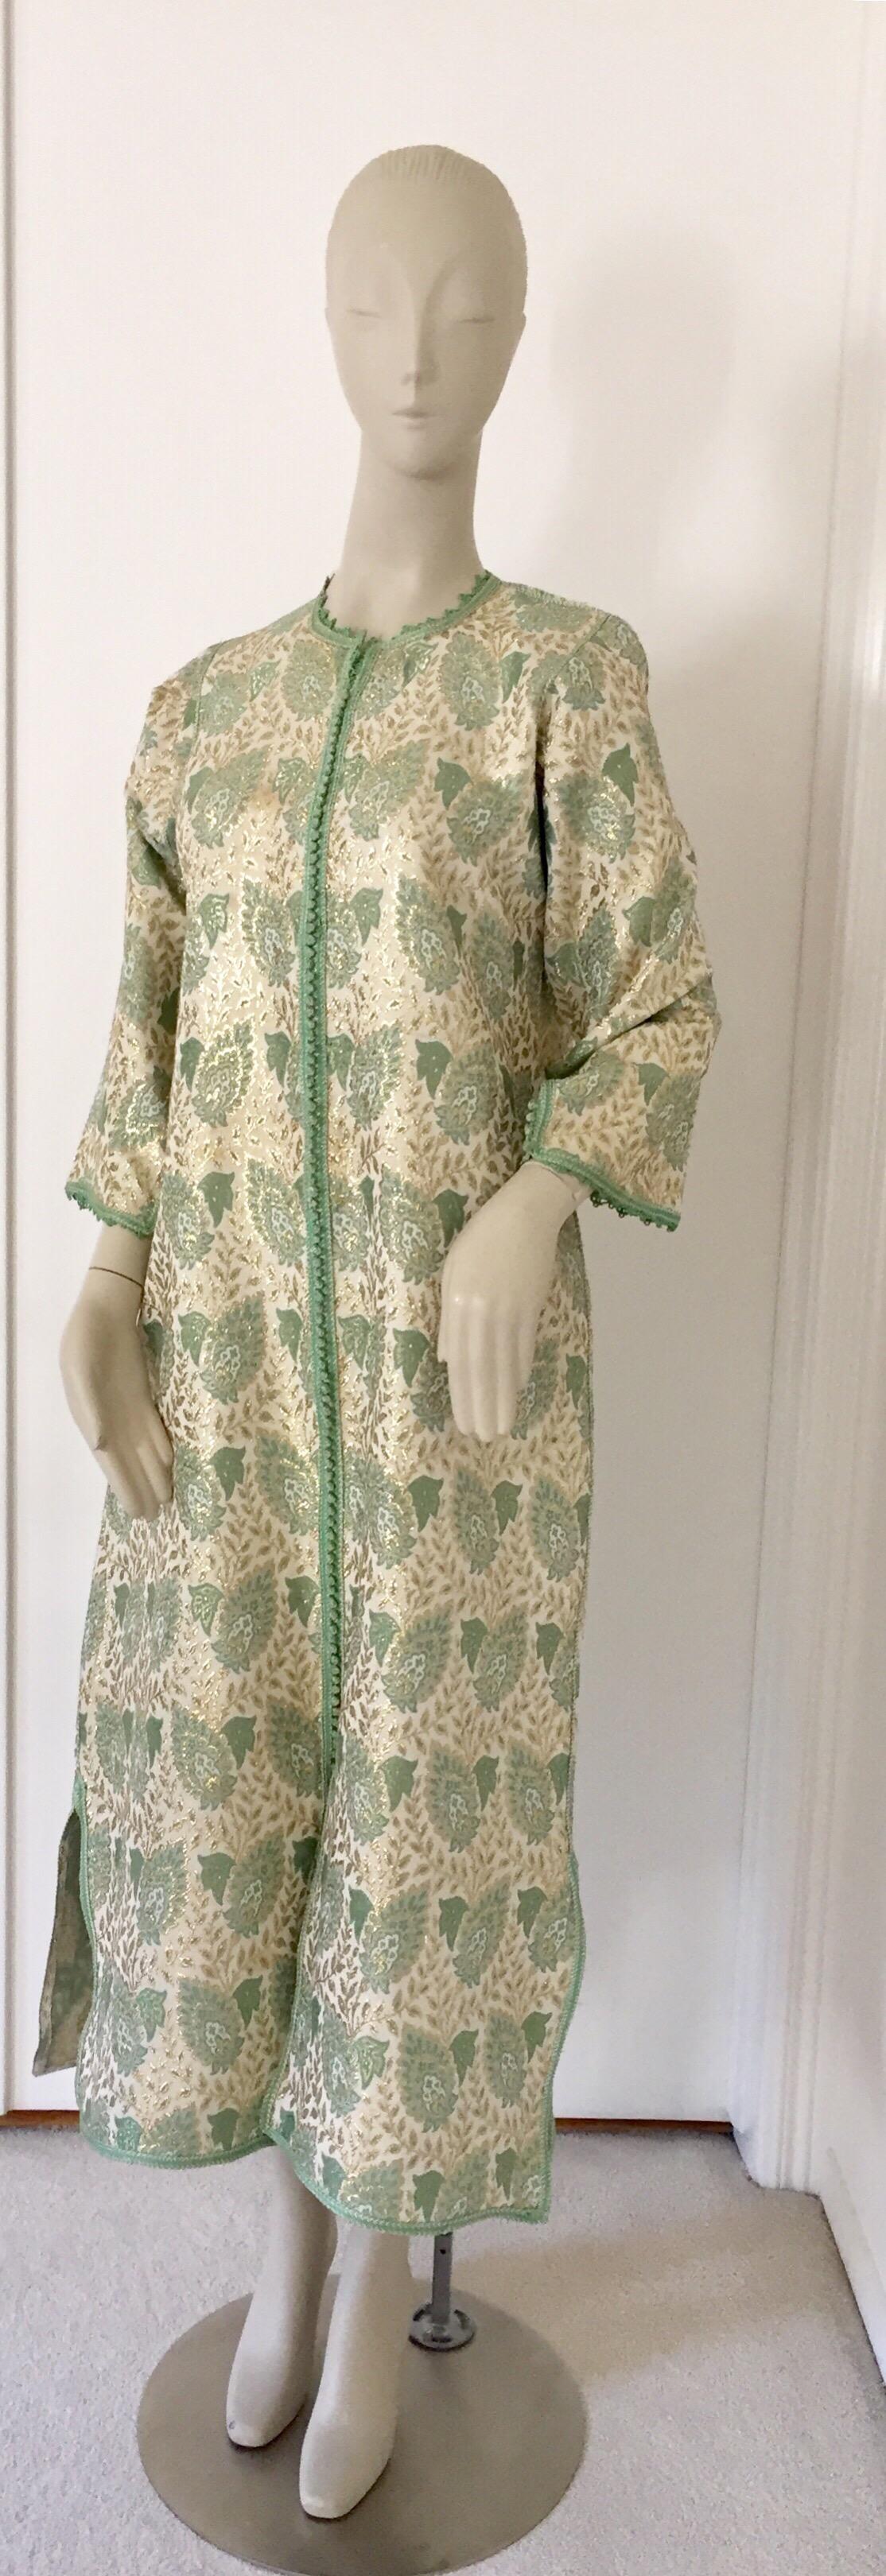 Elegant Moroccan Caftan Green and Silver and Gold Metallic Floral Brocade In Good Condition For Sale In North Hollywood, CA